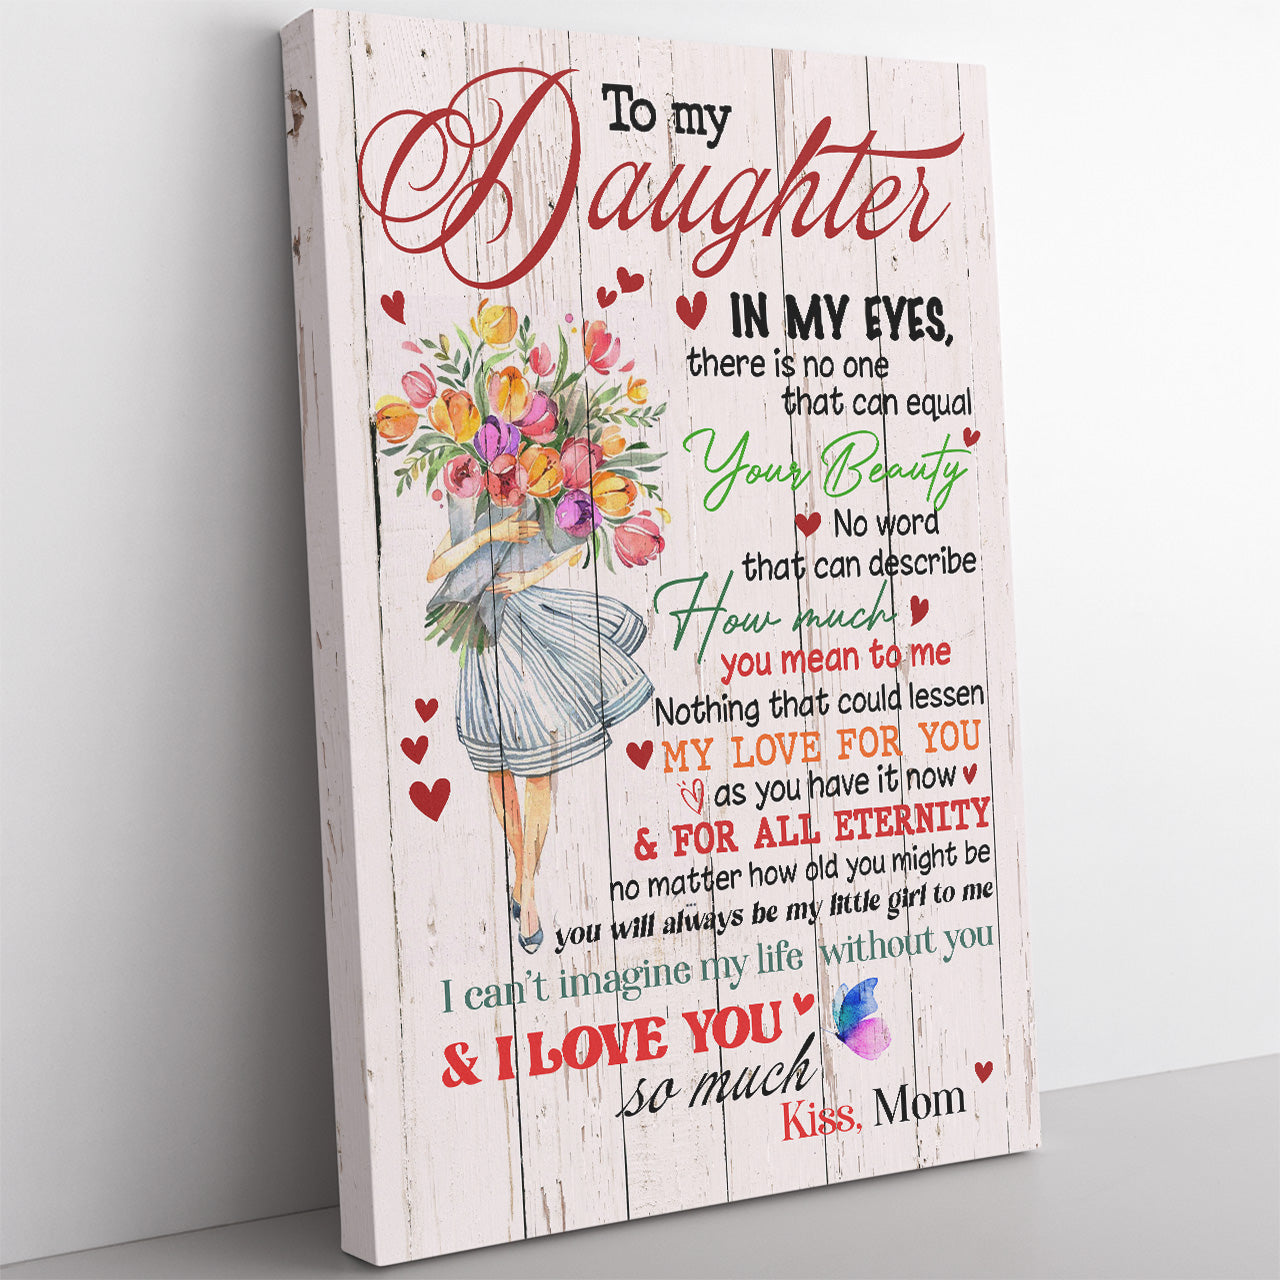 Floral Canvas Gift Ideas for Daughter, Your Beauty No One Can Equal Canvas from Mom to Daughter